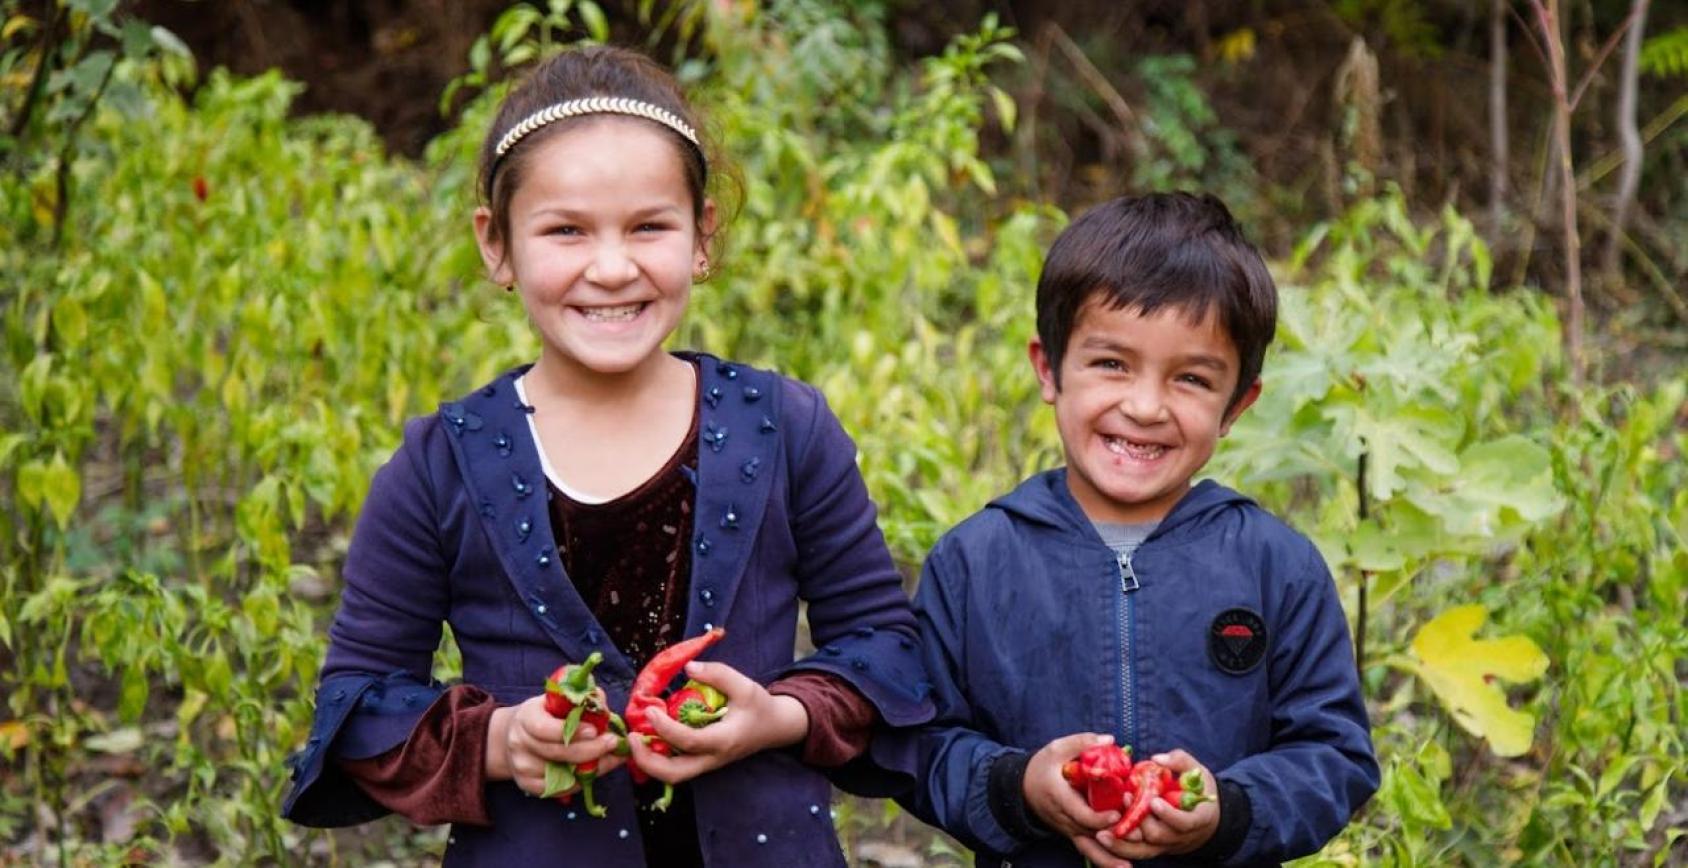 A young girl and a young boy dressed in blue clothes hold bright red peppers in their hand.